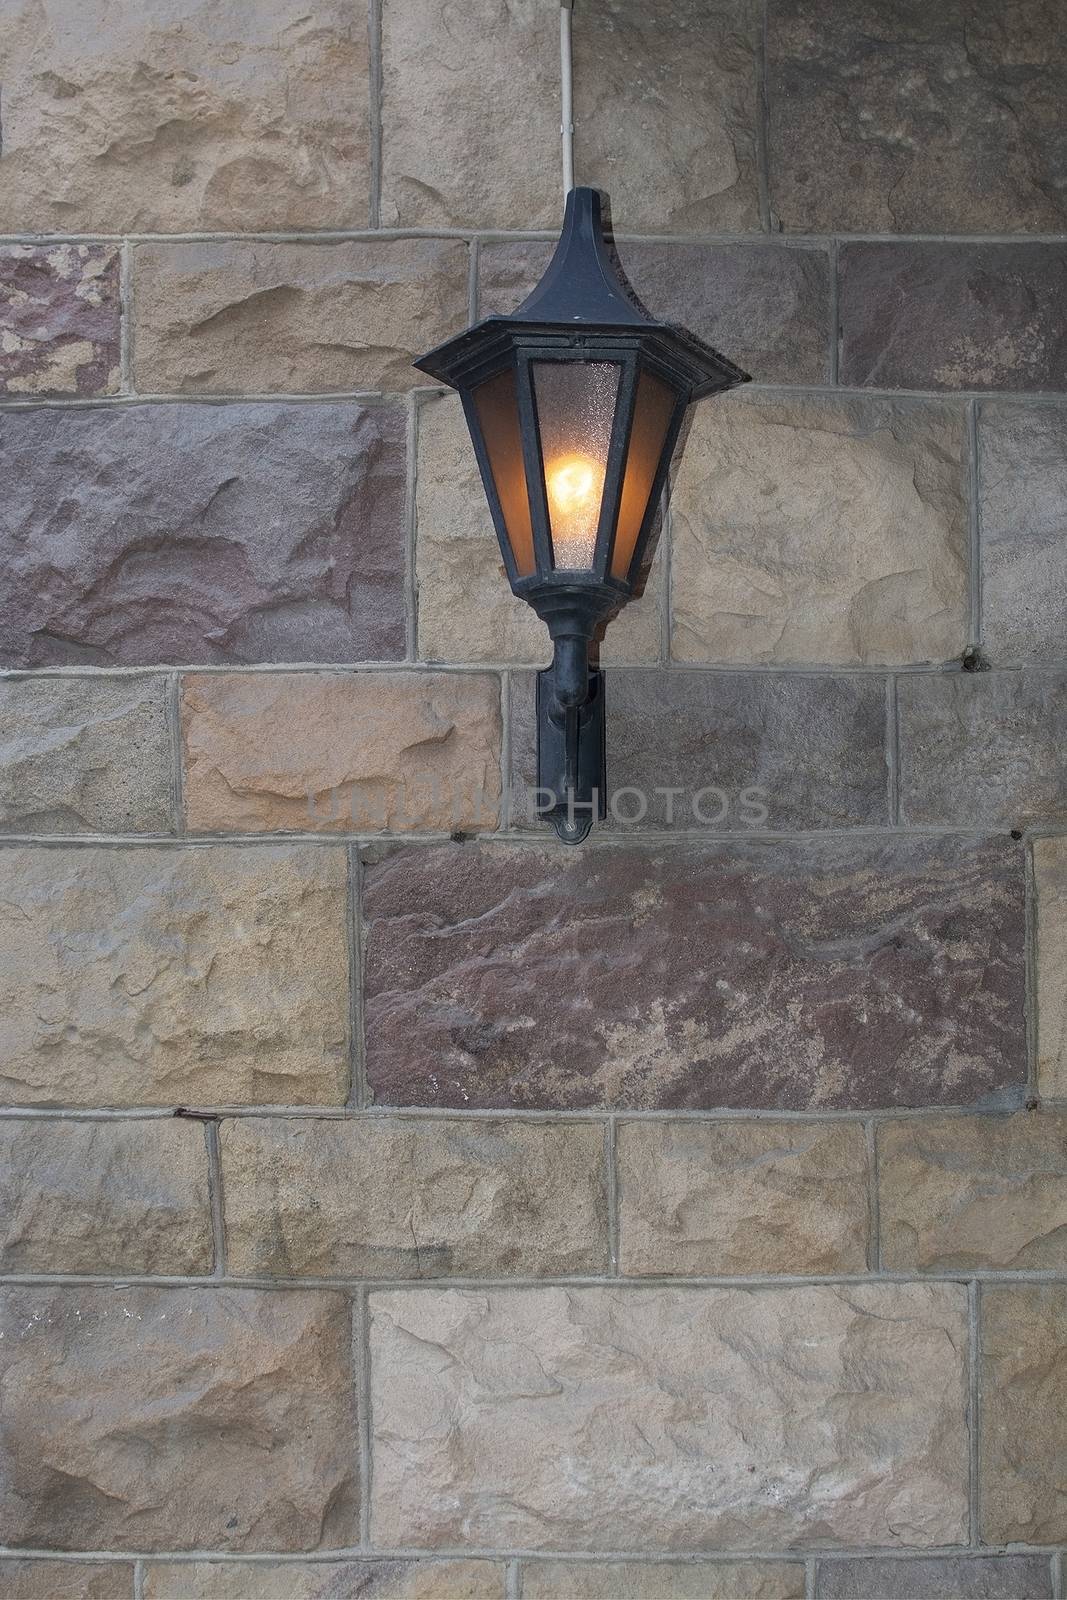 Wrought iron wall lamp on sandstone facade background copy space rustic texture.